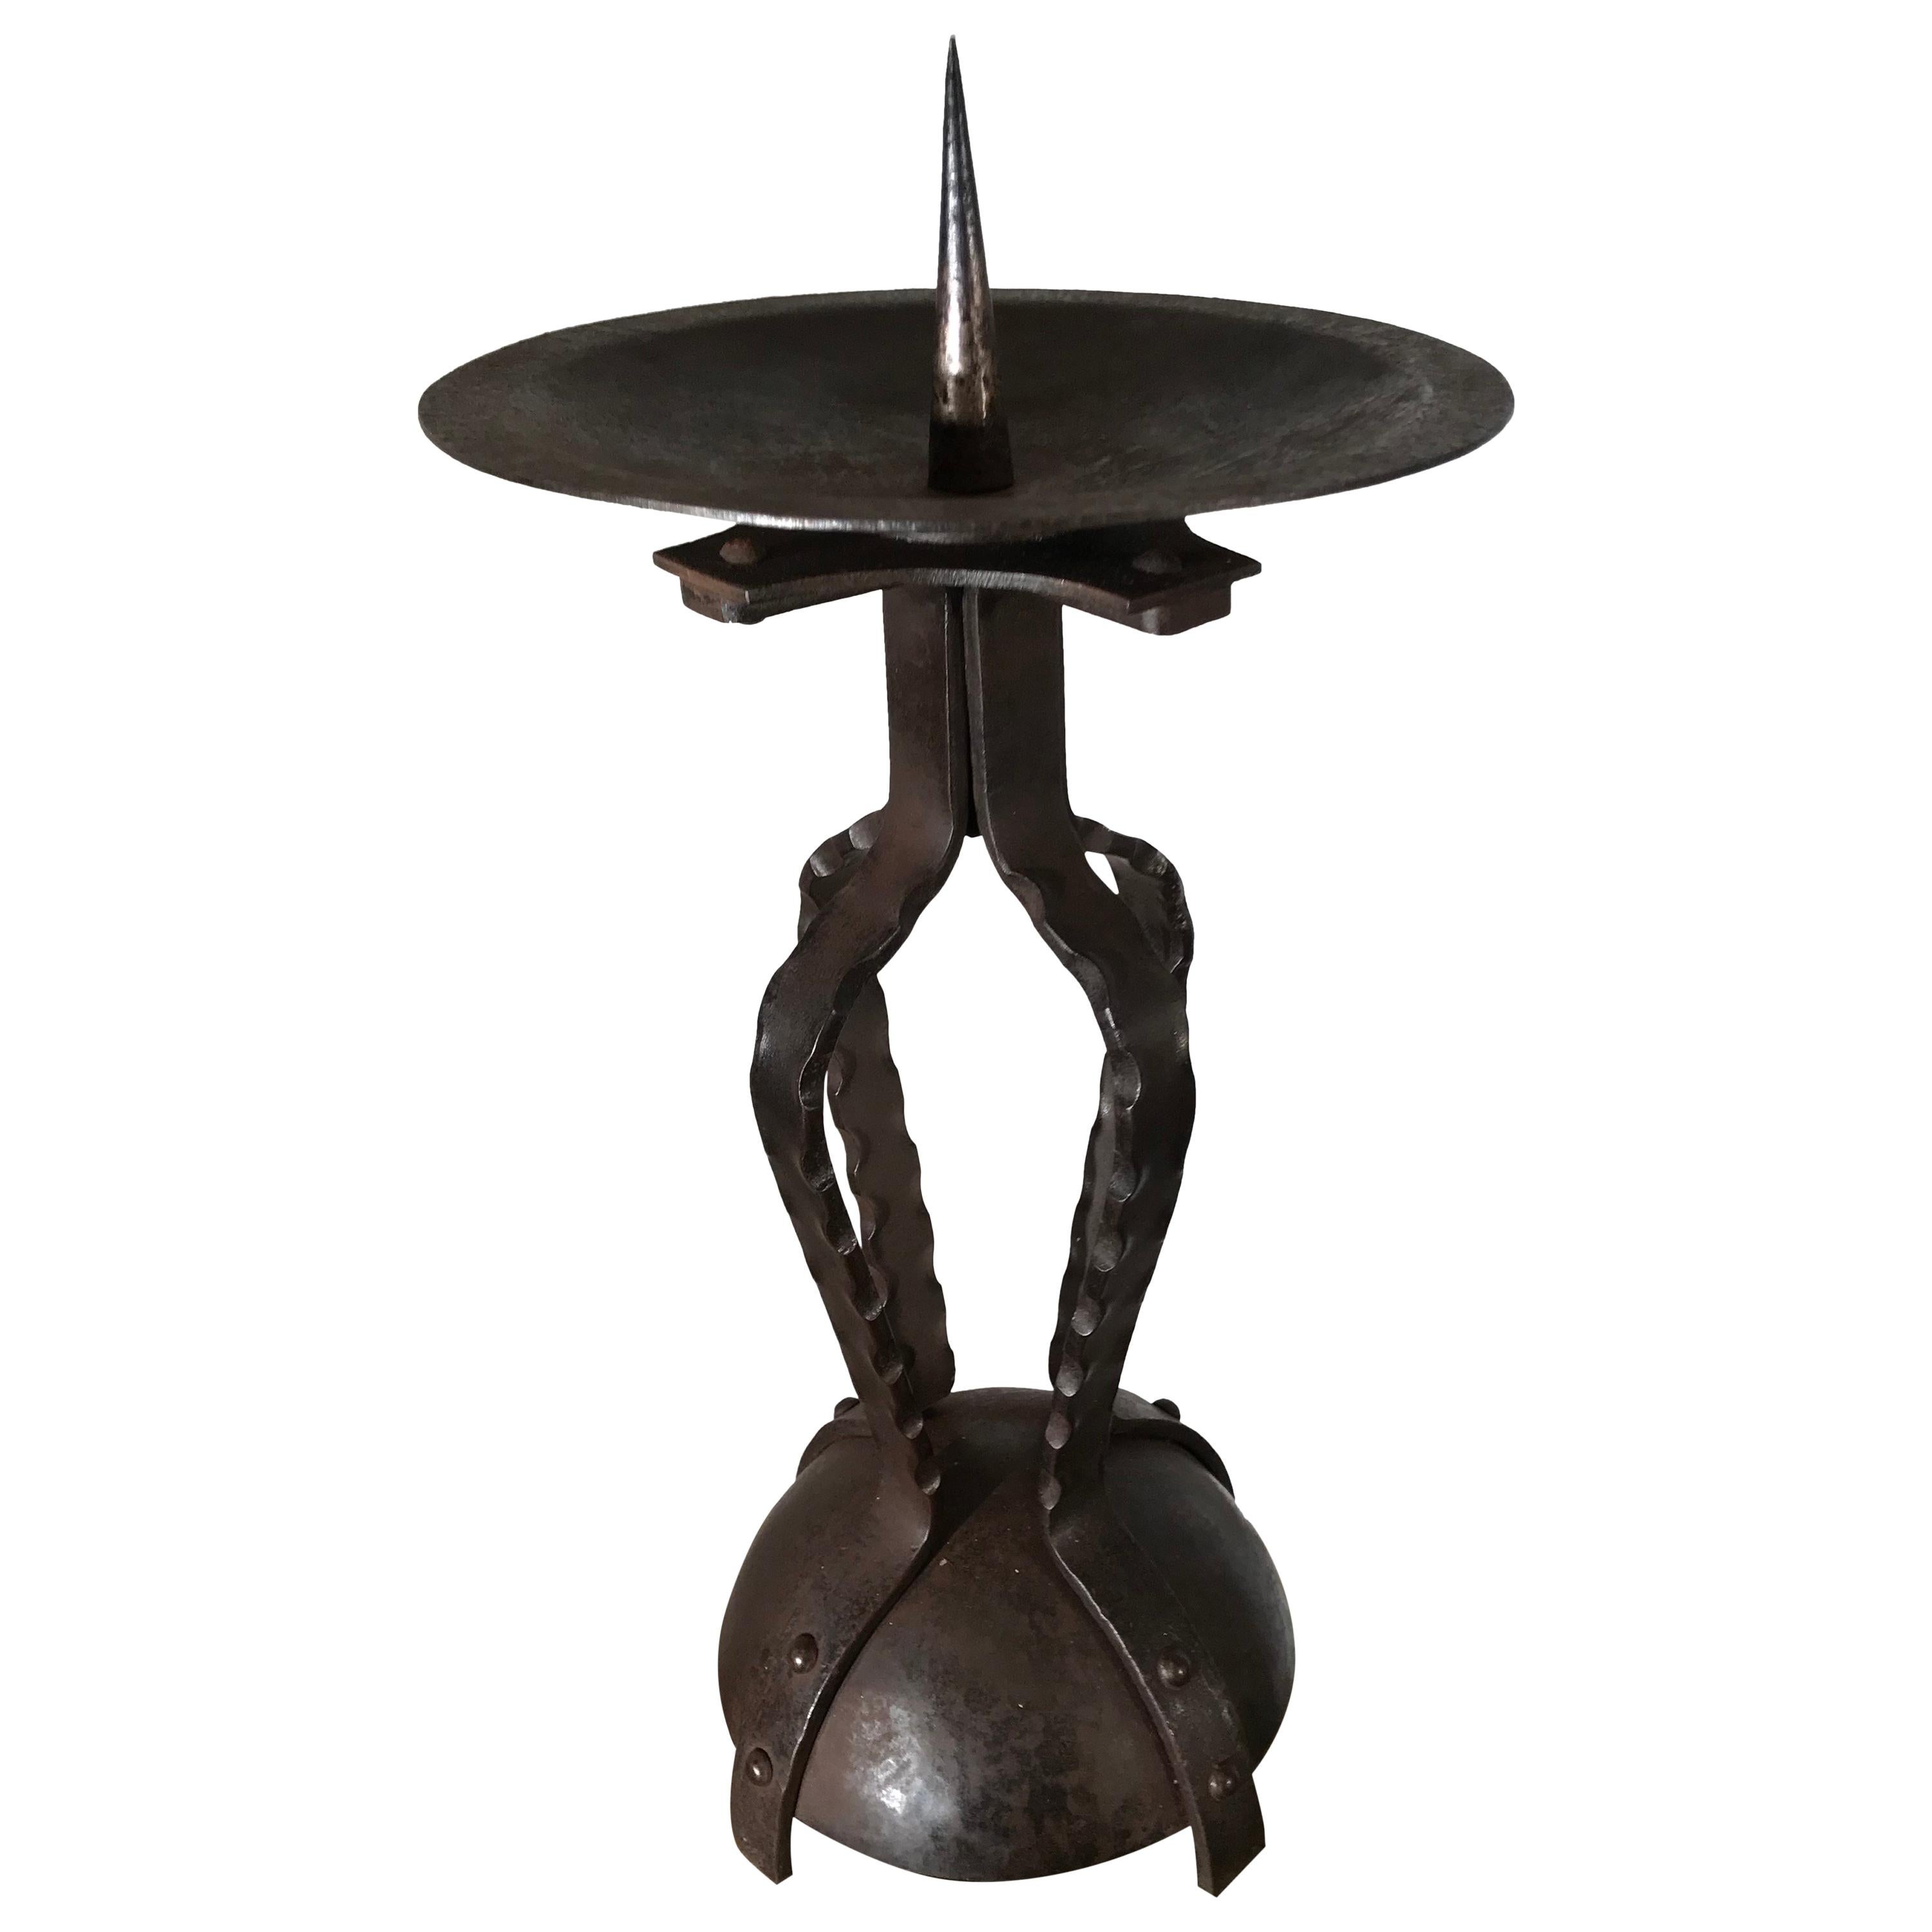 Artistic Design and All Handcrafted, Wrought Iron Arts & Crafts Candlestick For Sale